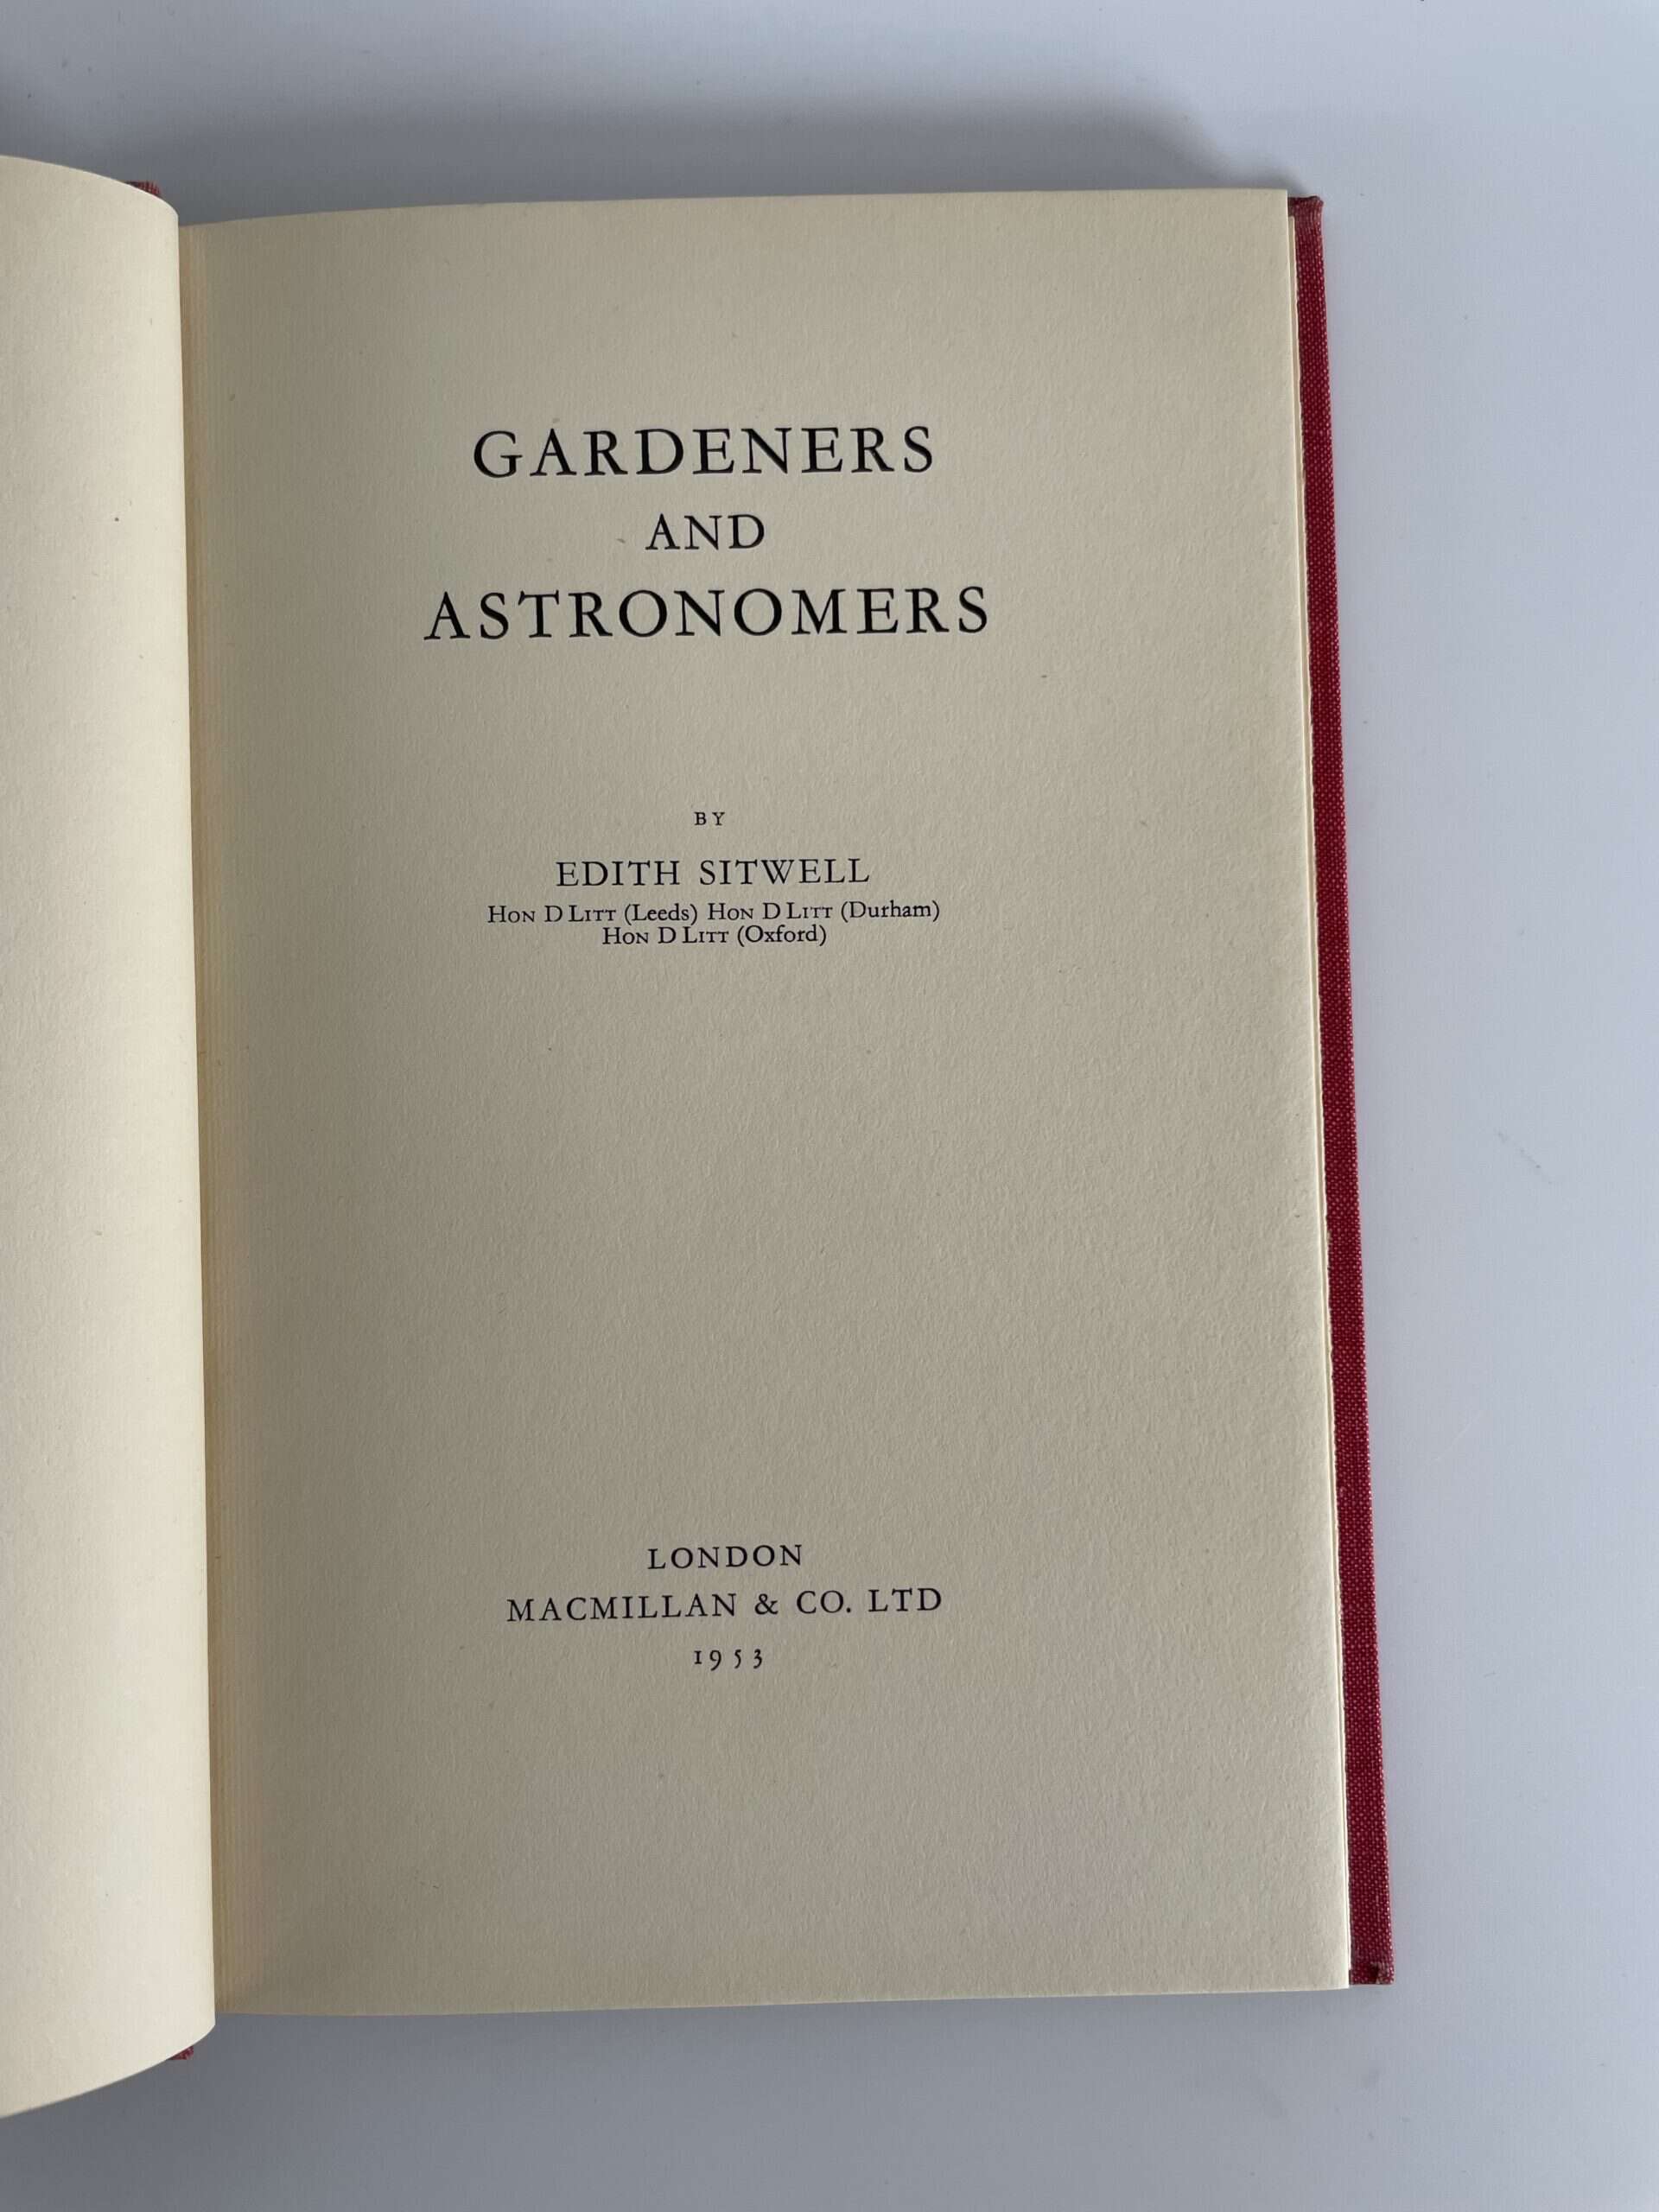 edith sitwell gardeners and astonomers signed first 3